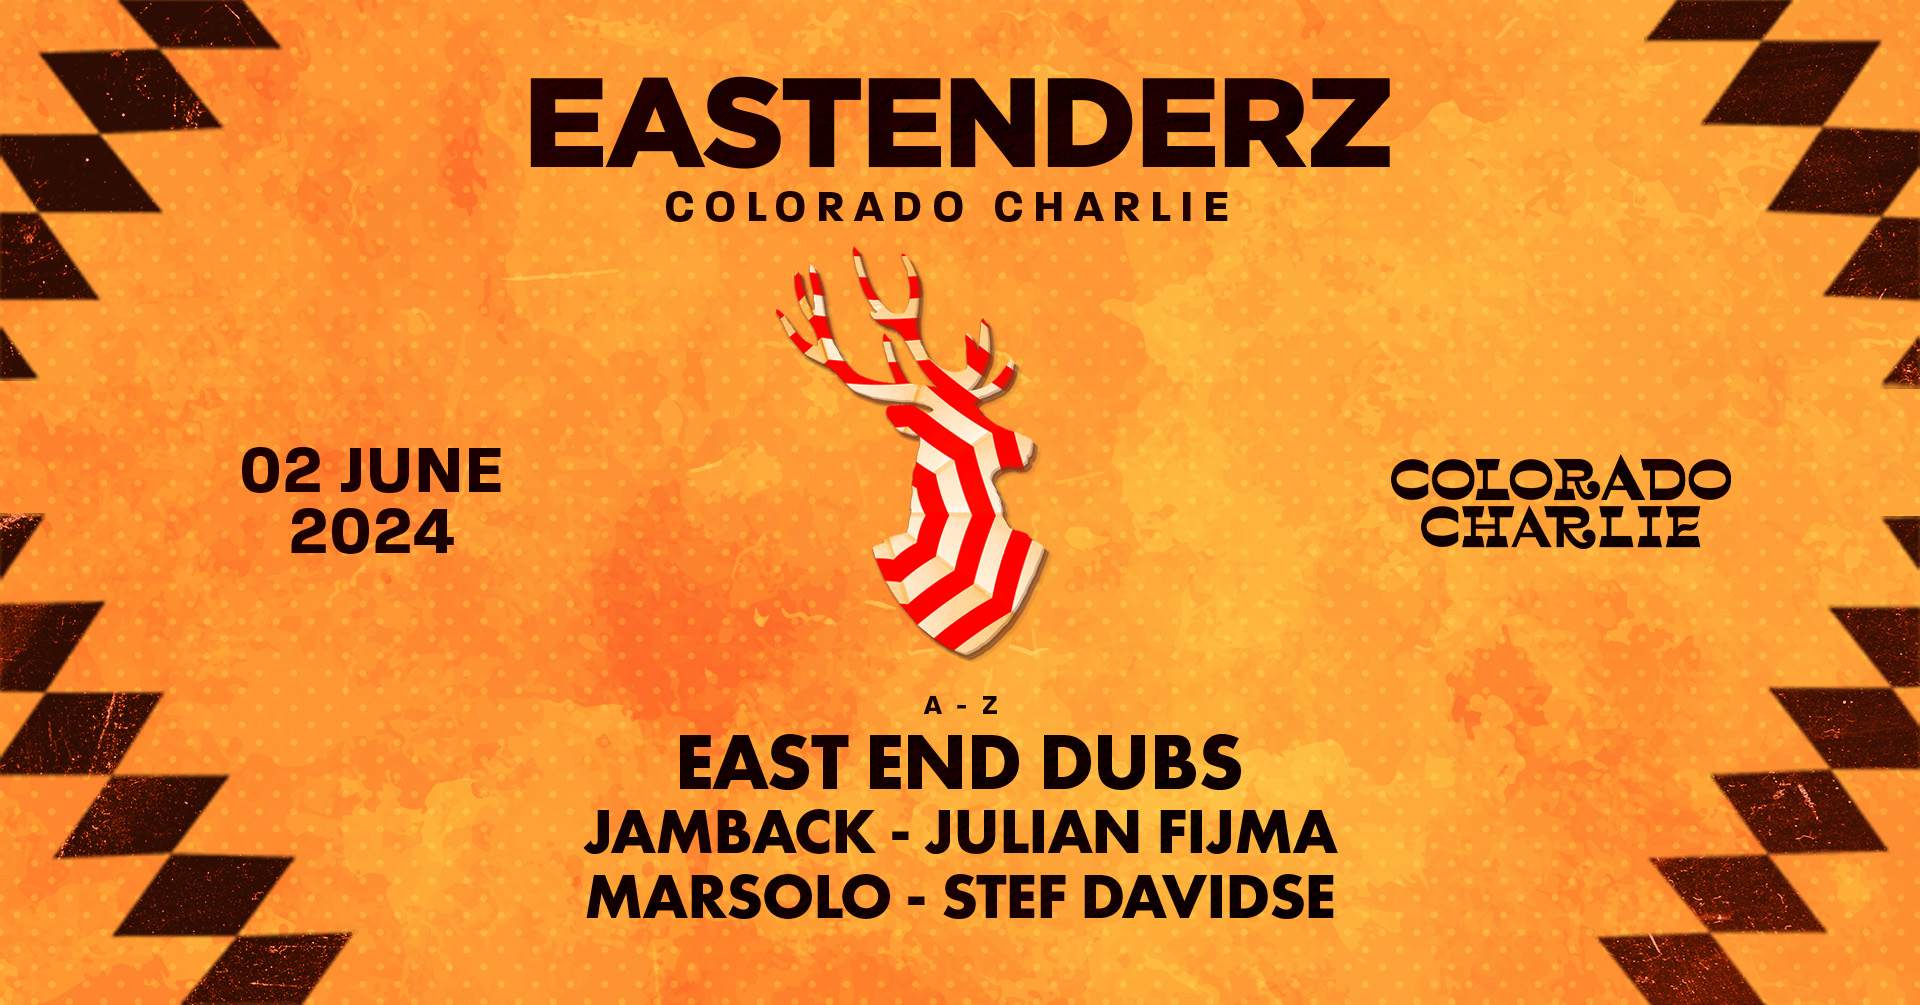 Eastenderz at Colorado Charlie [SOLD OUT] - フライヤー表